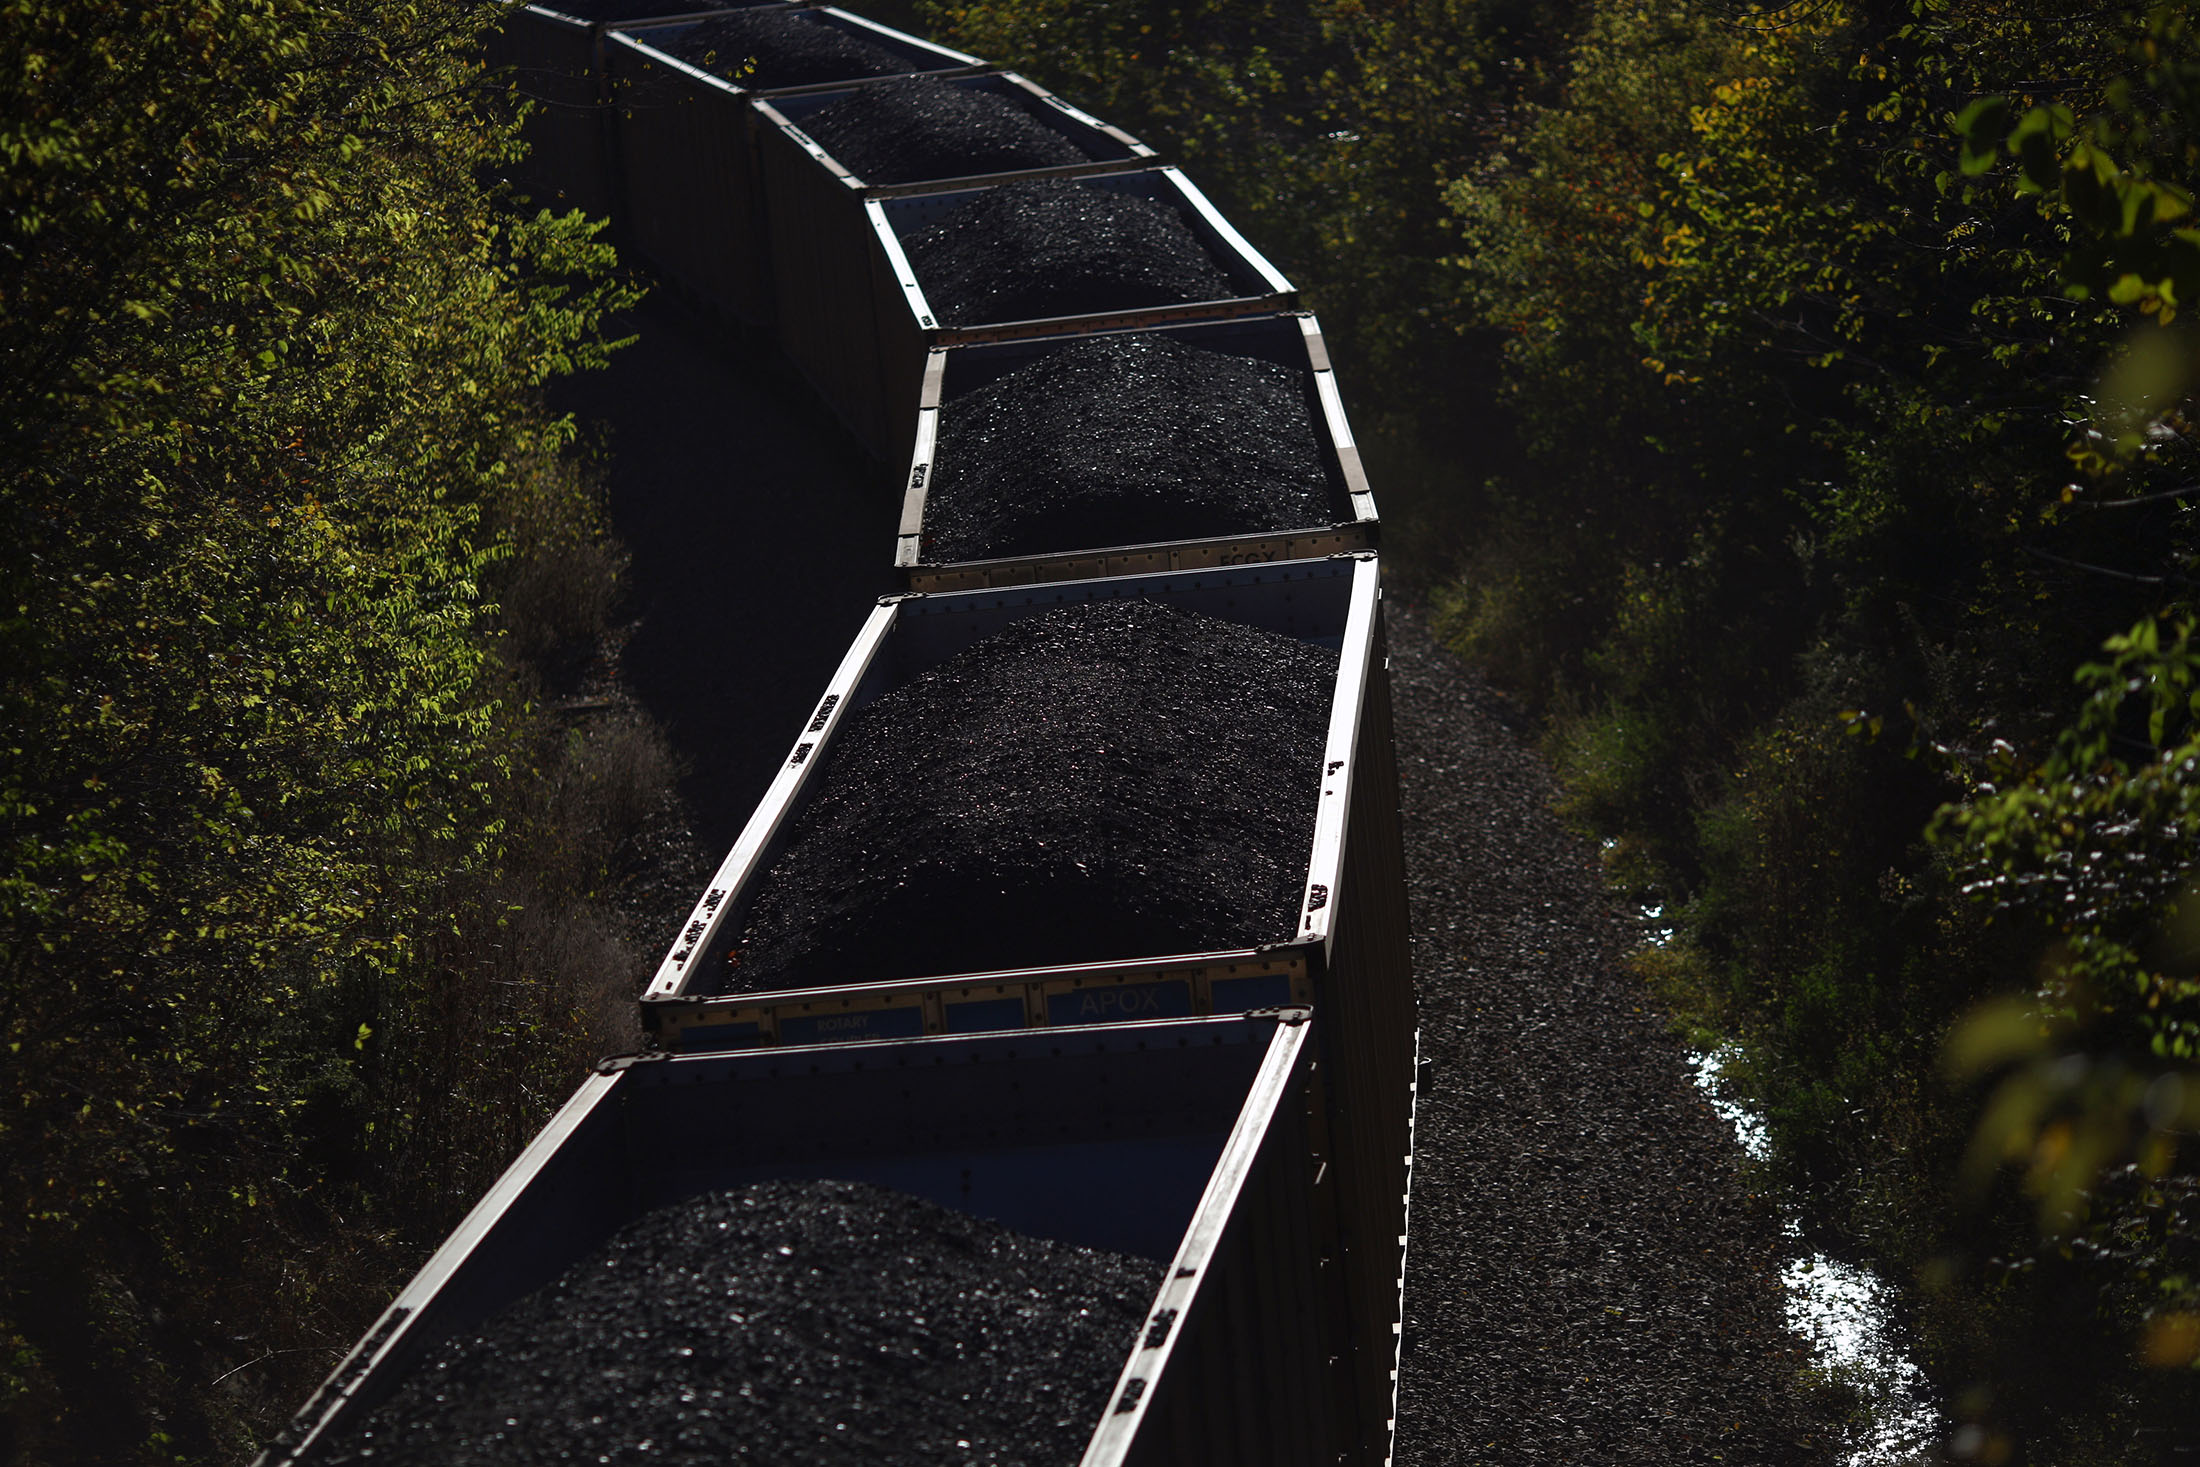 Hopper cars laden with coal trail behind an eastbound freight train heading through Waddy, Kentucky, U.S.